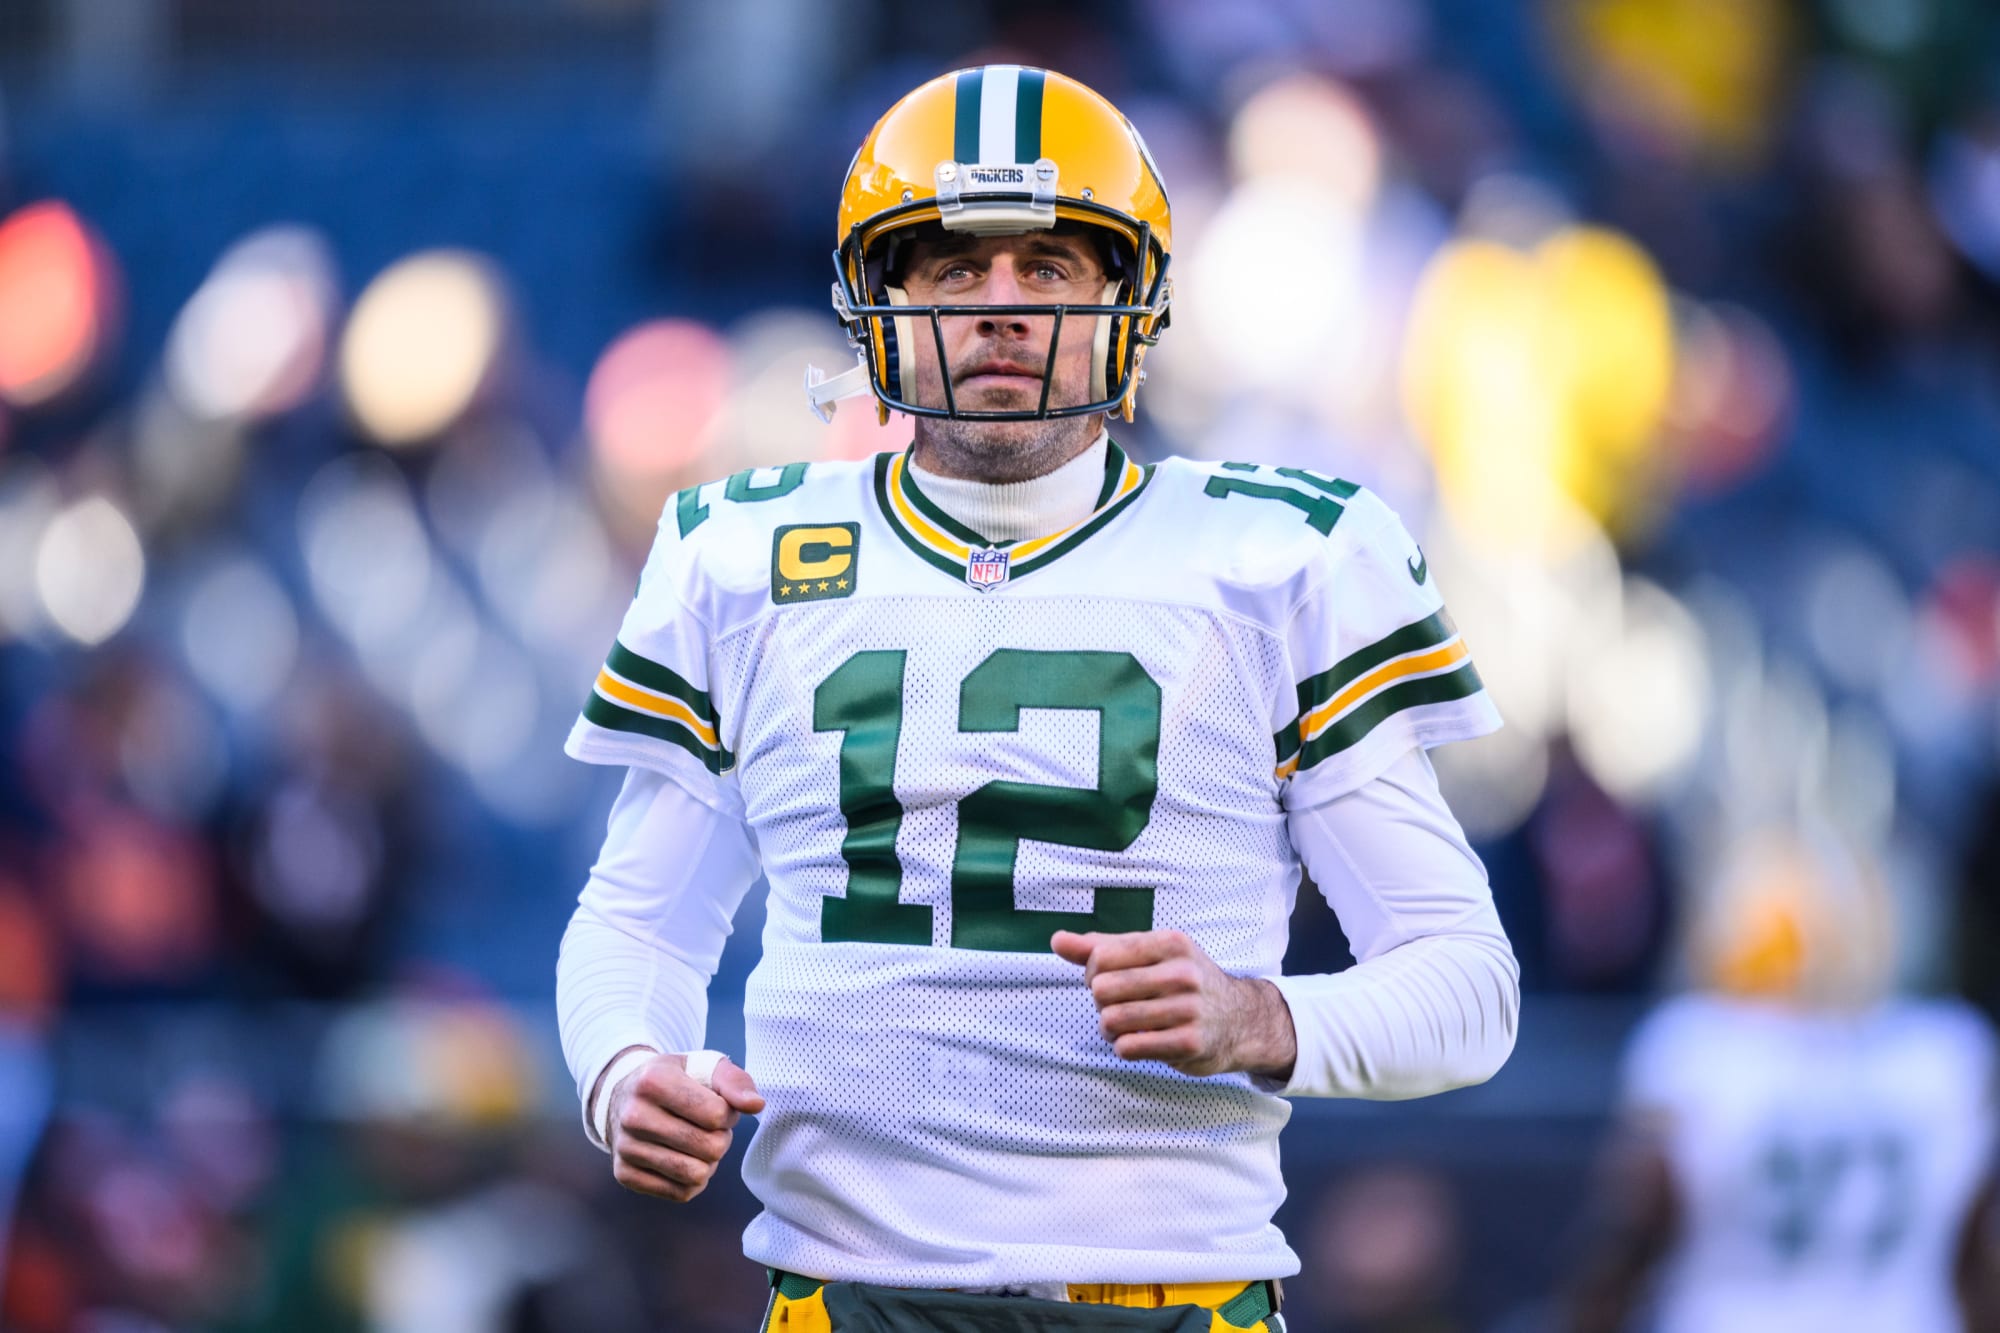 NFL Rumors: Aaron Rodgers comments responsible for holding up trade between Packers, Jets